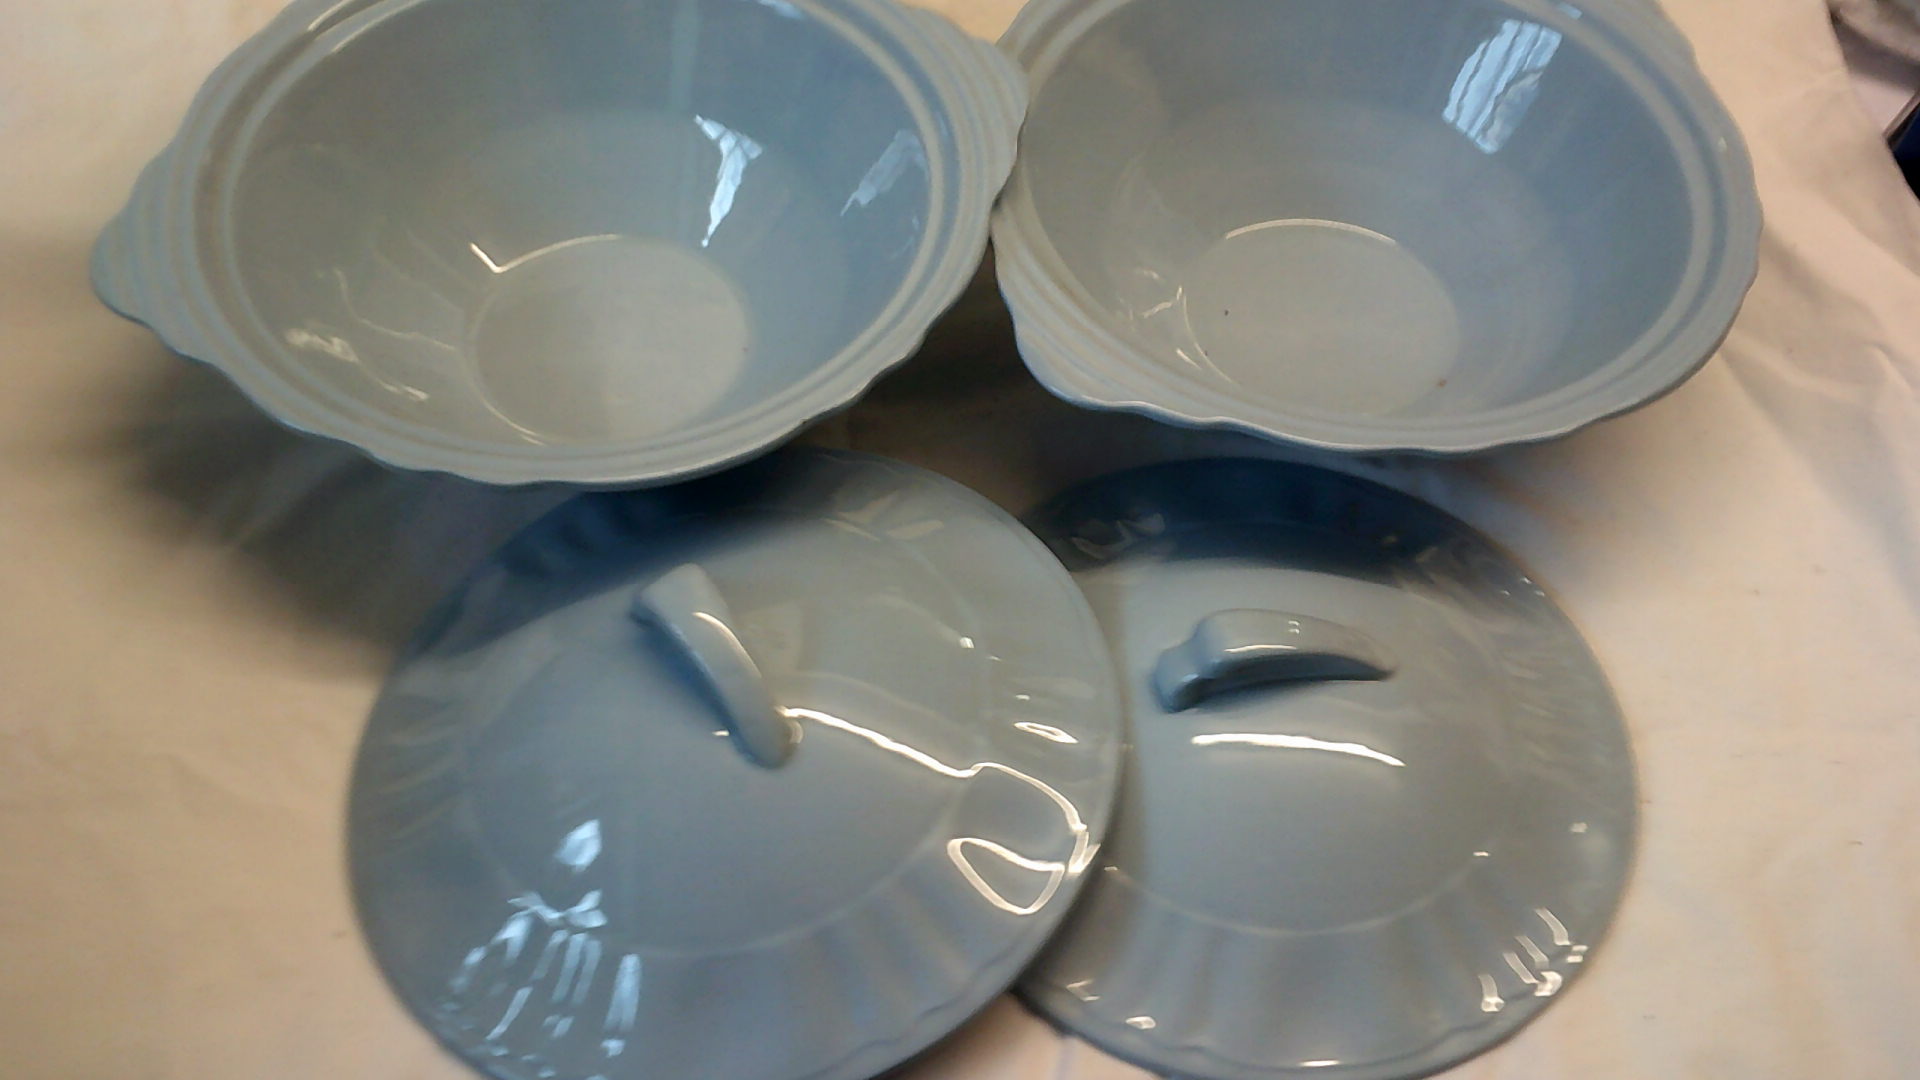 Serving Dishes-J + G Meakin - Blue serving dishes (2) with Lids in good condition